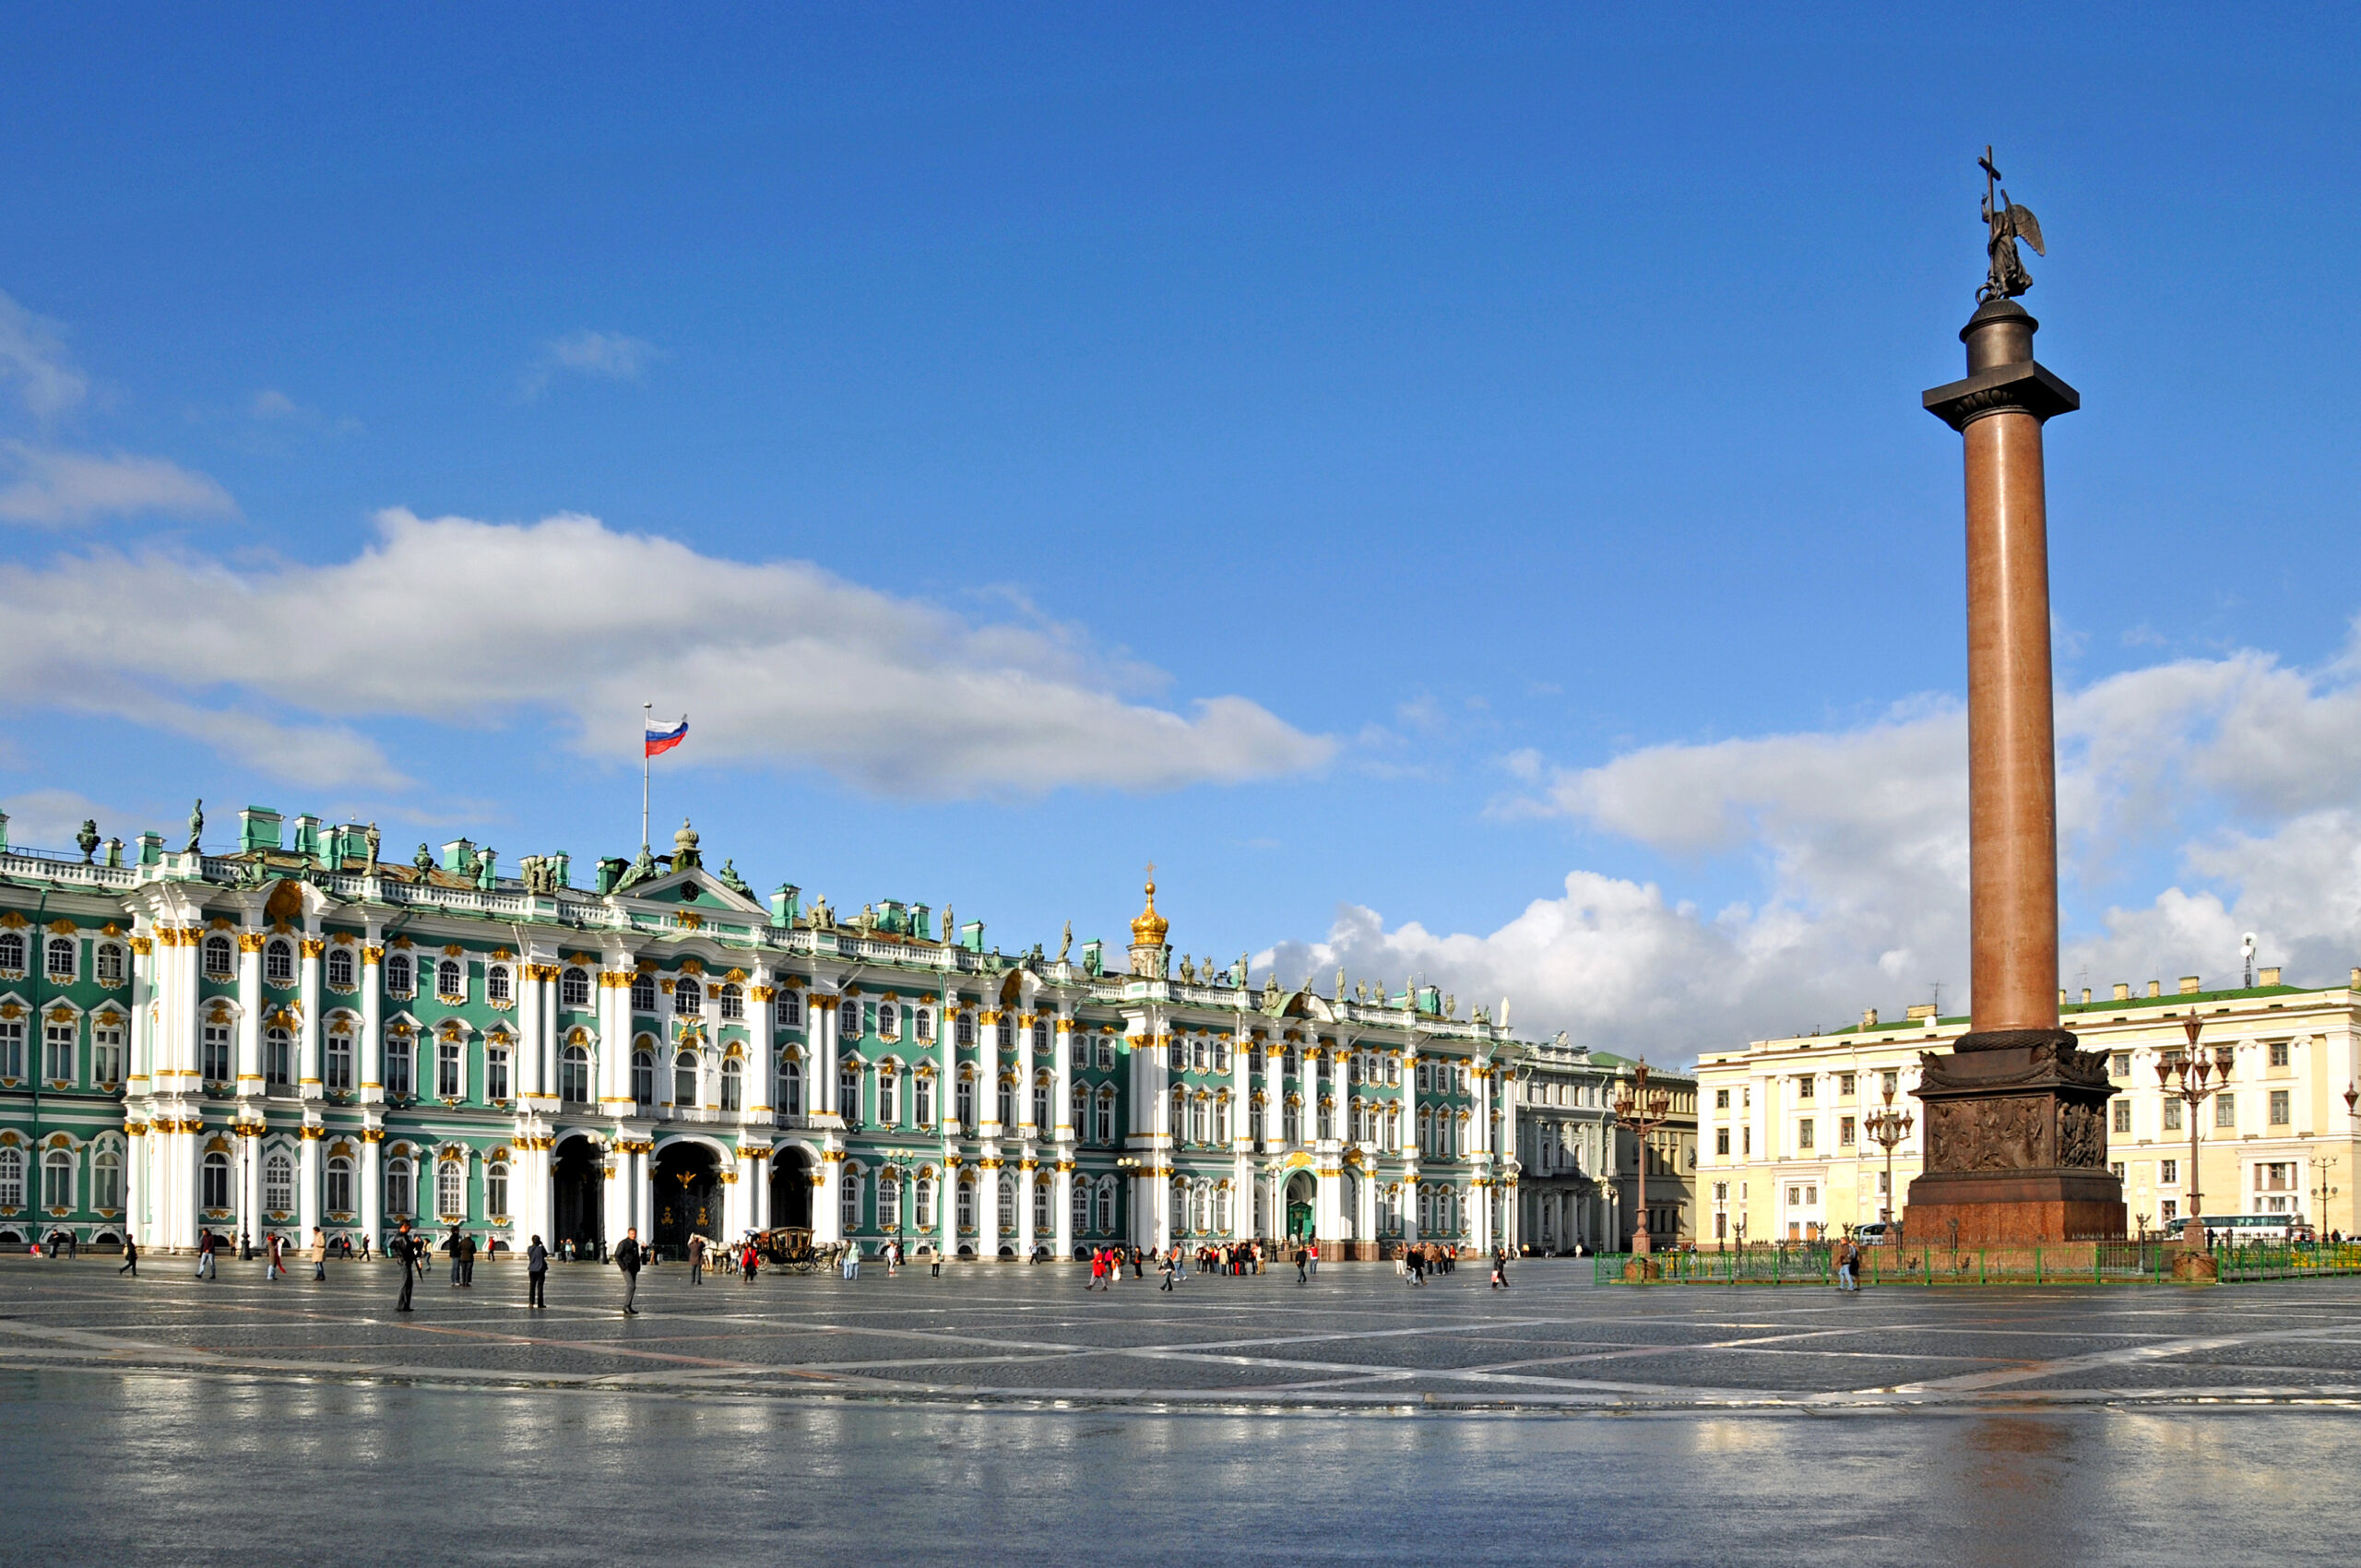 Picture of the Winter Palace in St. Petersburg